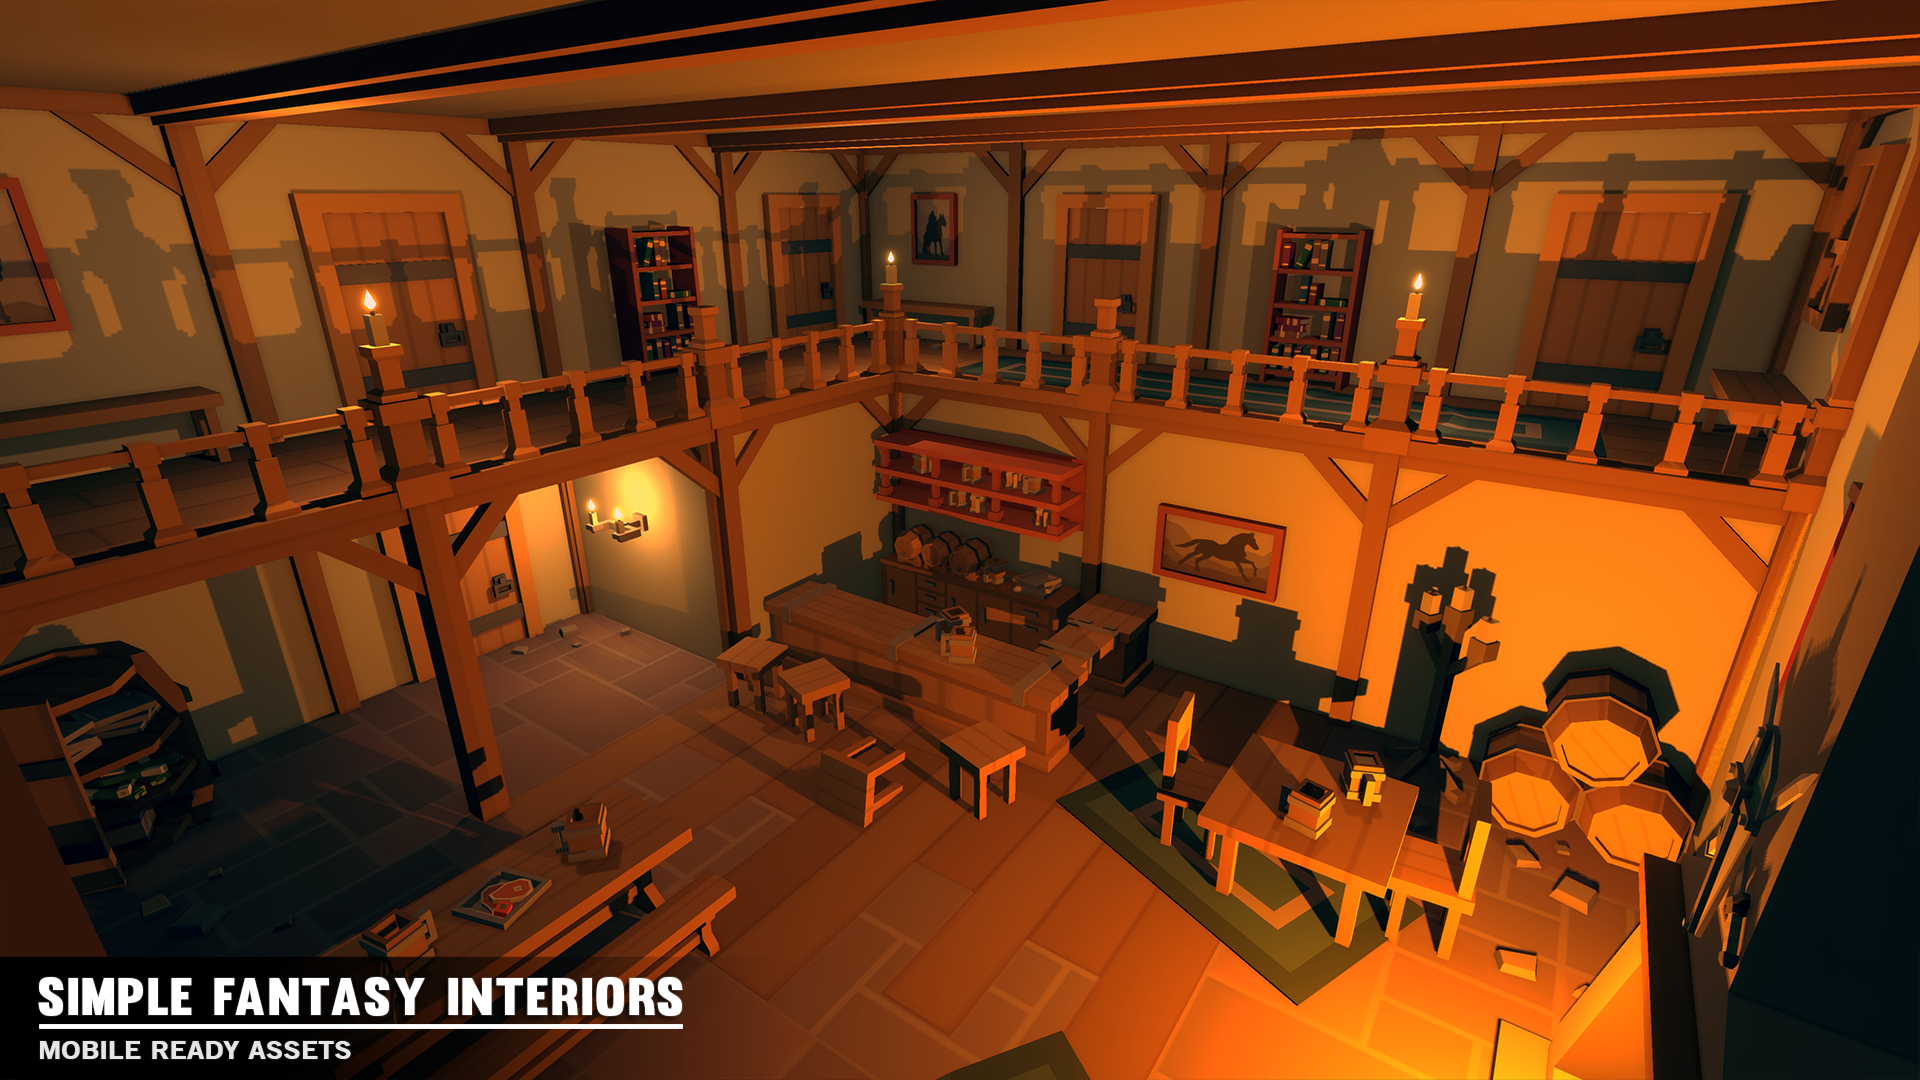 Simple Fantasy Interiors - Cartoon Assets - Synty Studios - Unity and Unreal 3D low poly assets for game development